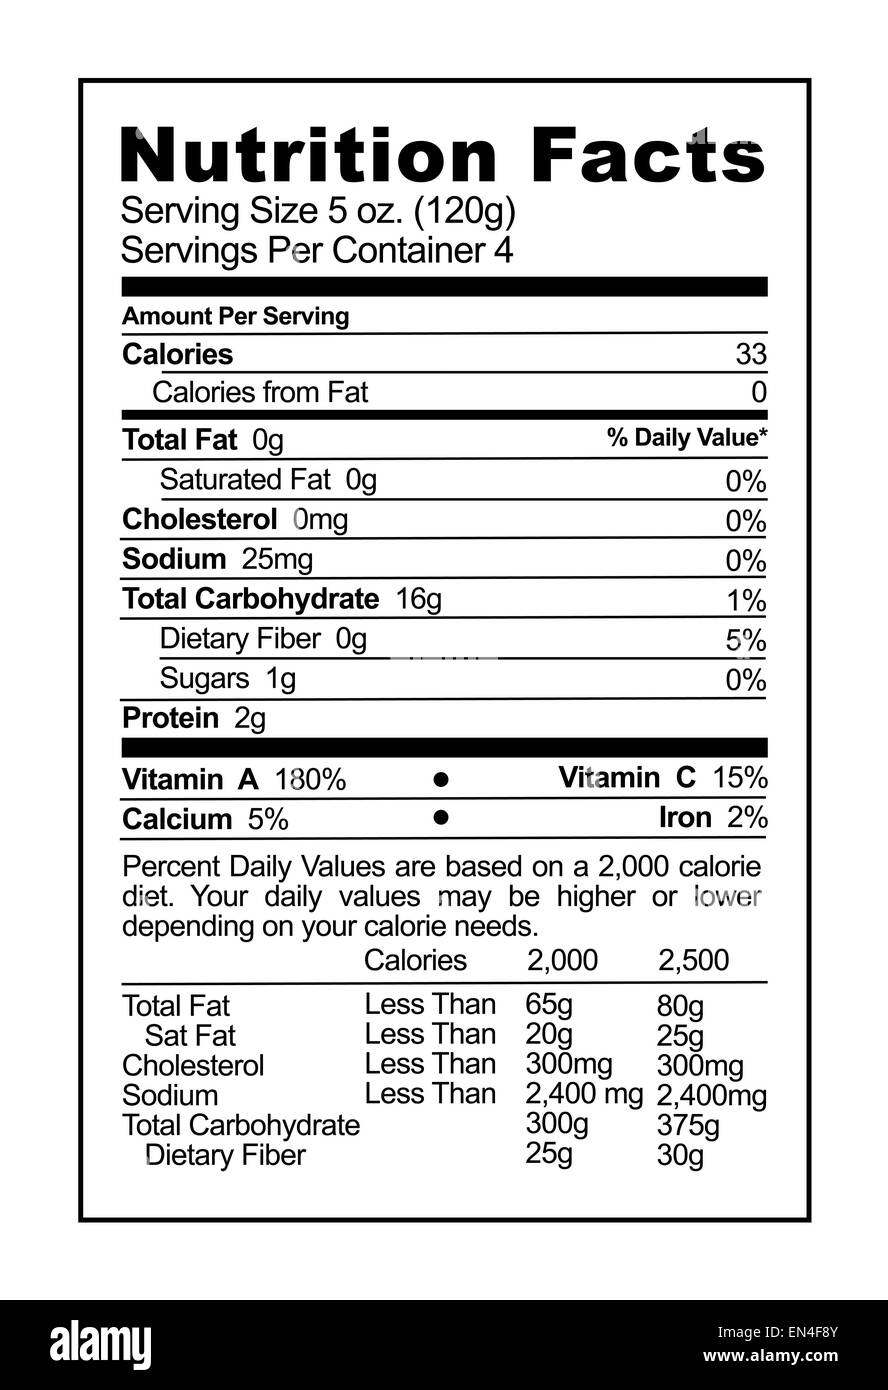 Black and White Food Health Facts Label. Stock Photo